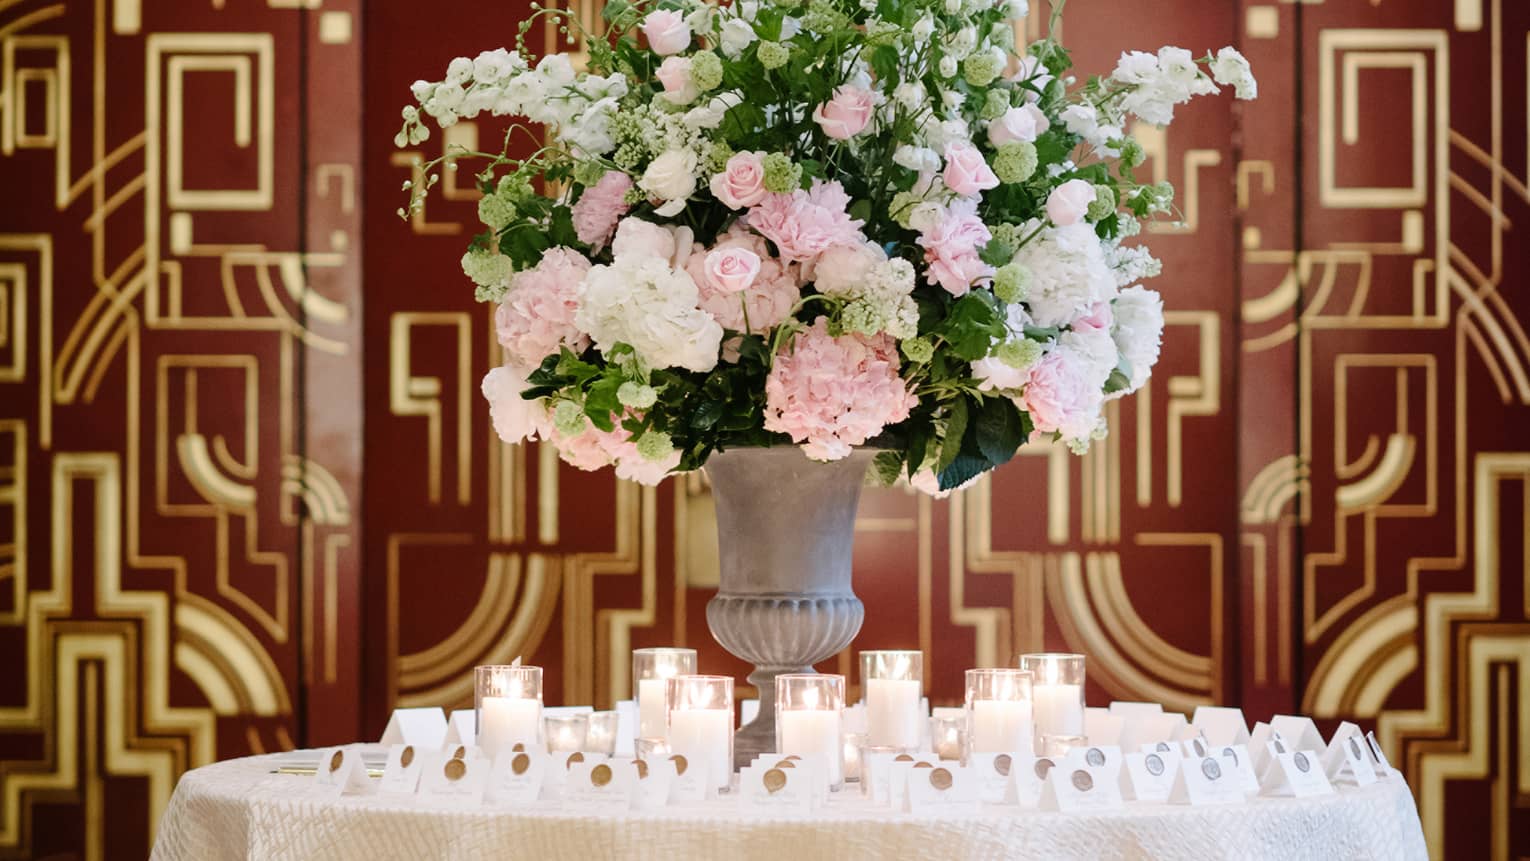 Glowing candles and name cards around vase with pink and white flowers against Art Deco wall